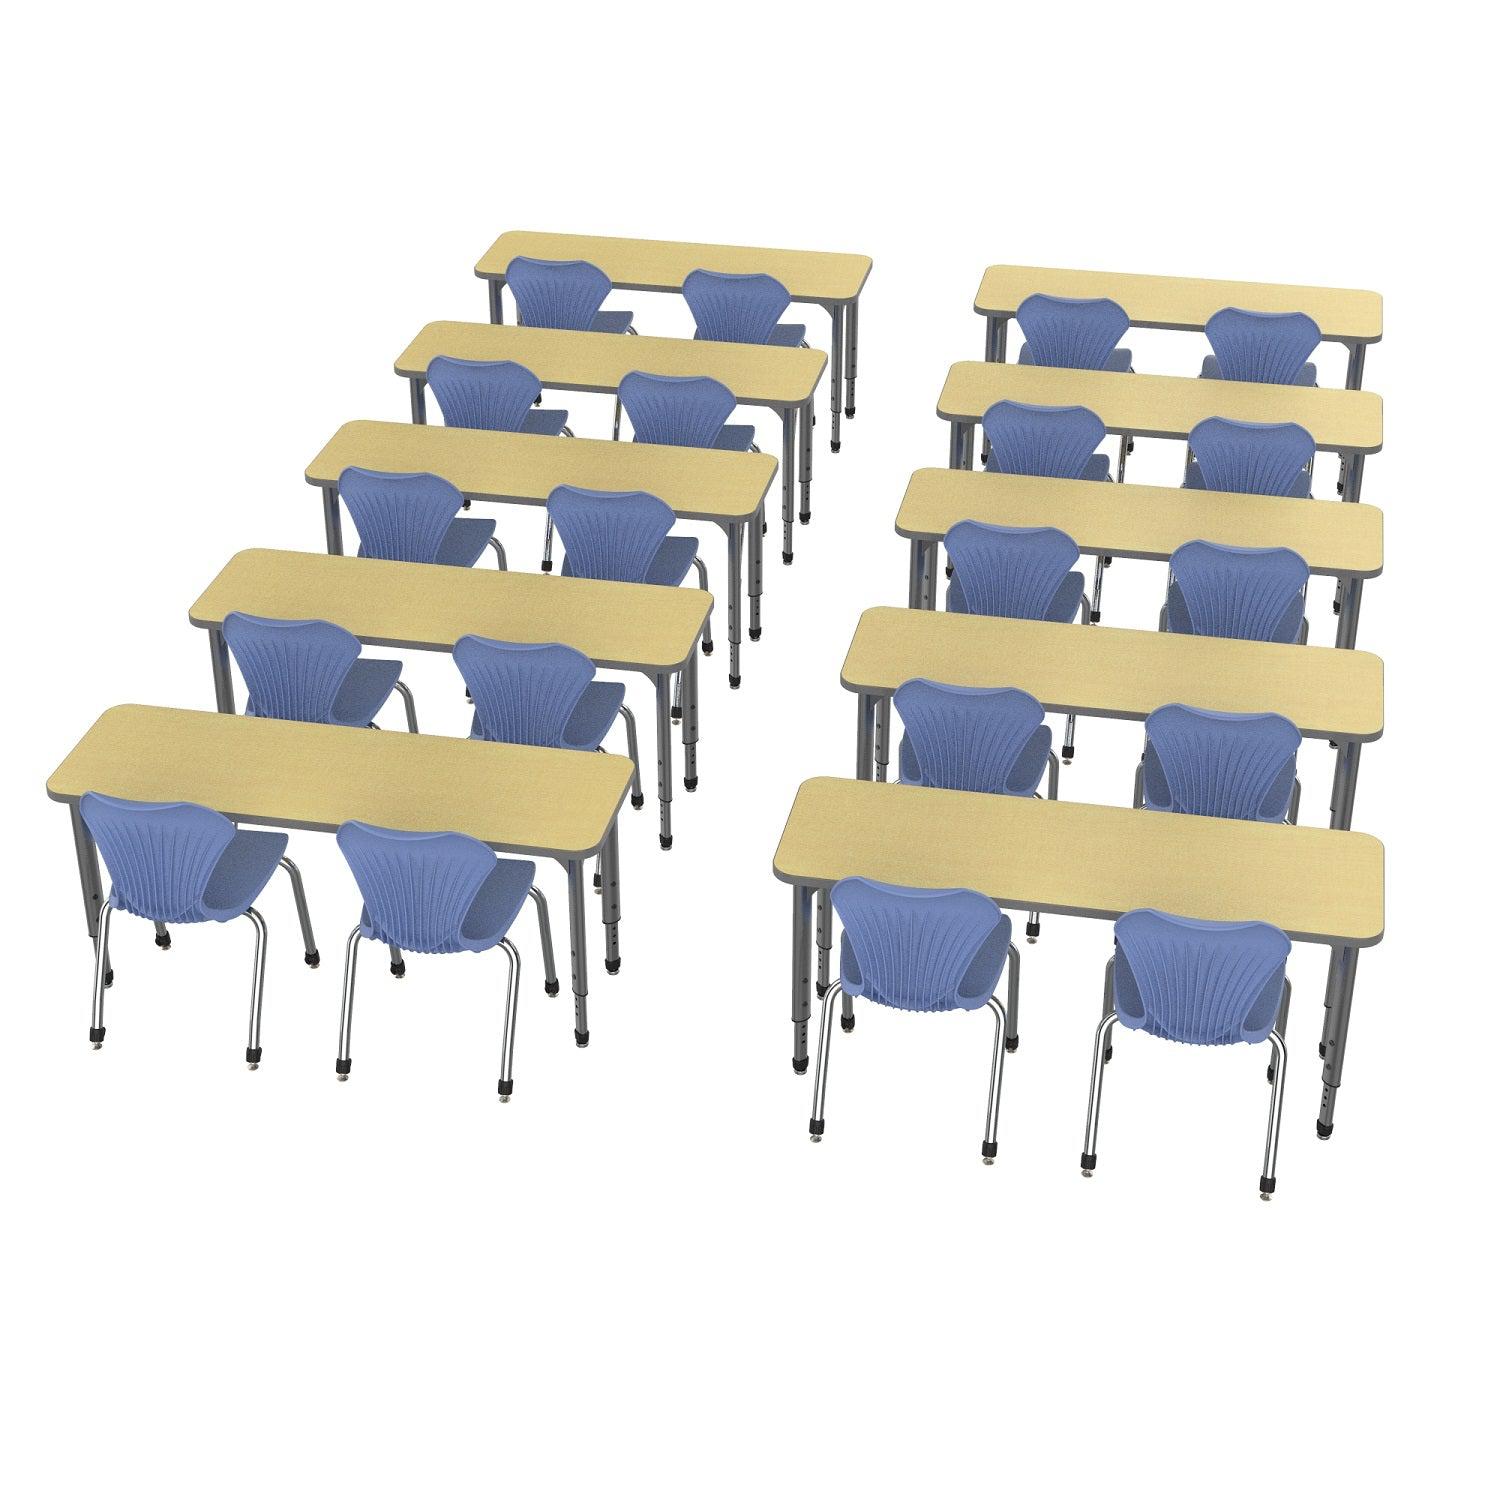 Classroom Desk &amp; Chair Packages